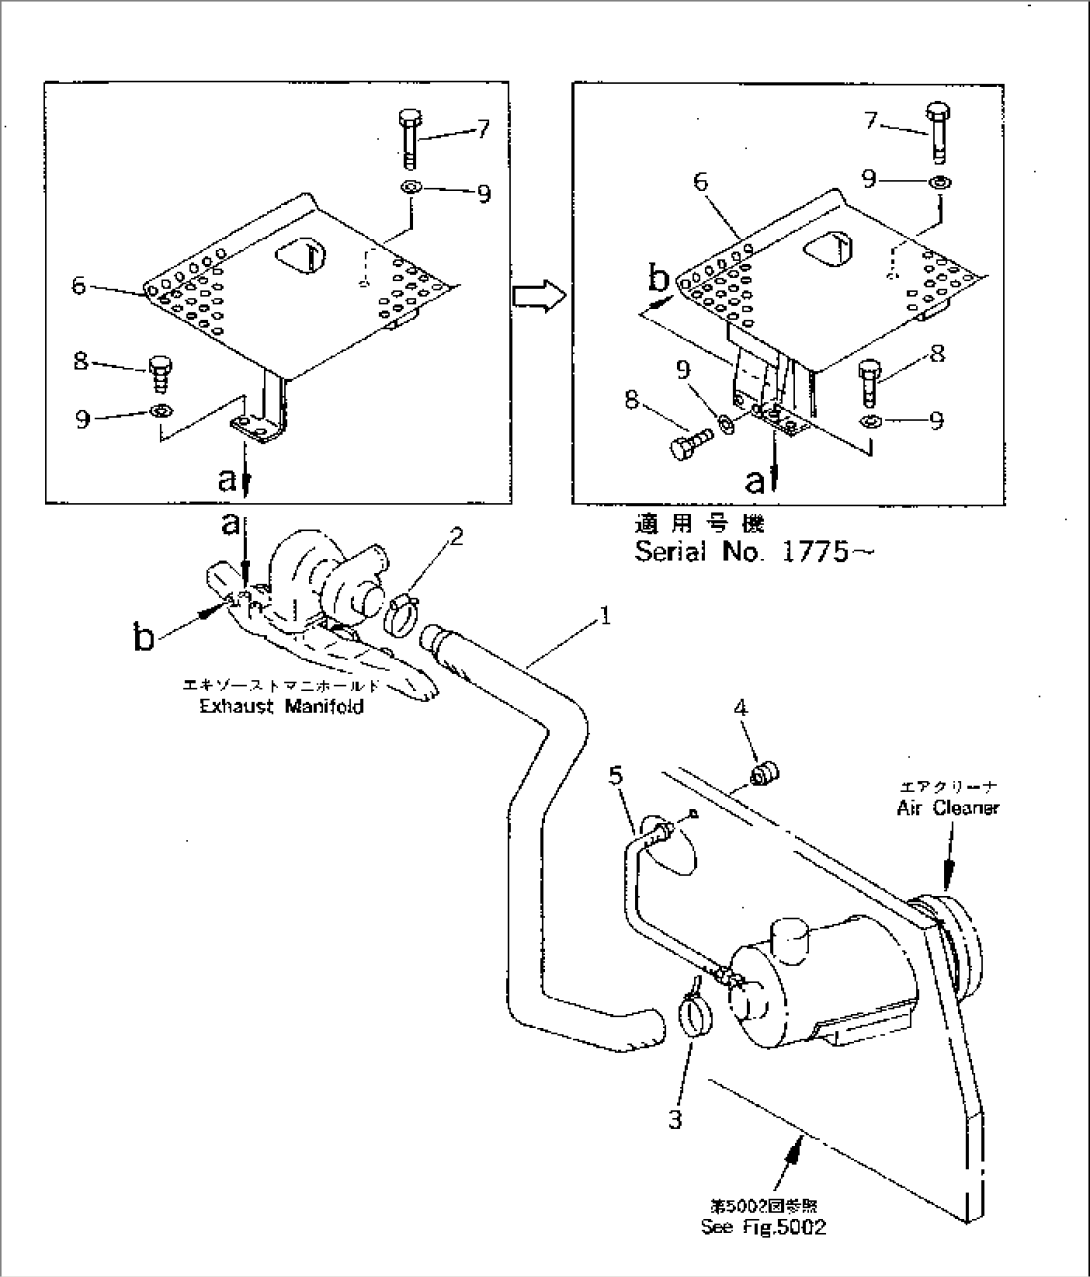 AIR CLEANER CONNECTION AND STEP(#1601-1861)